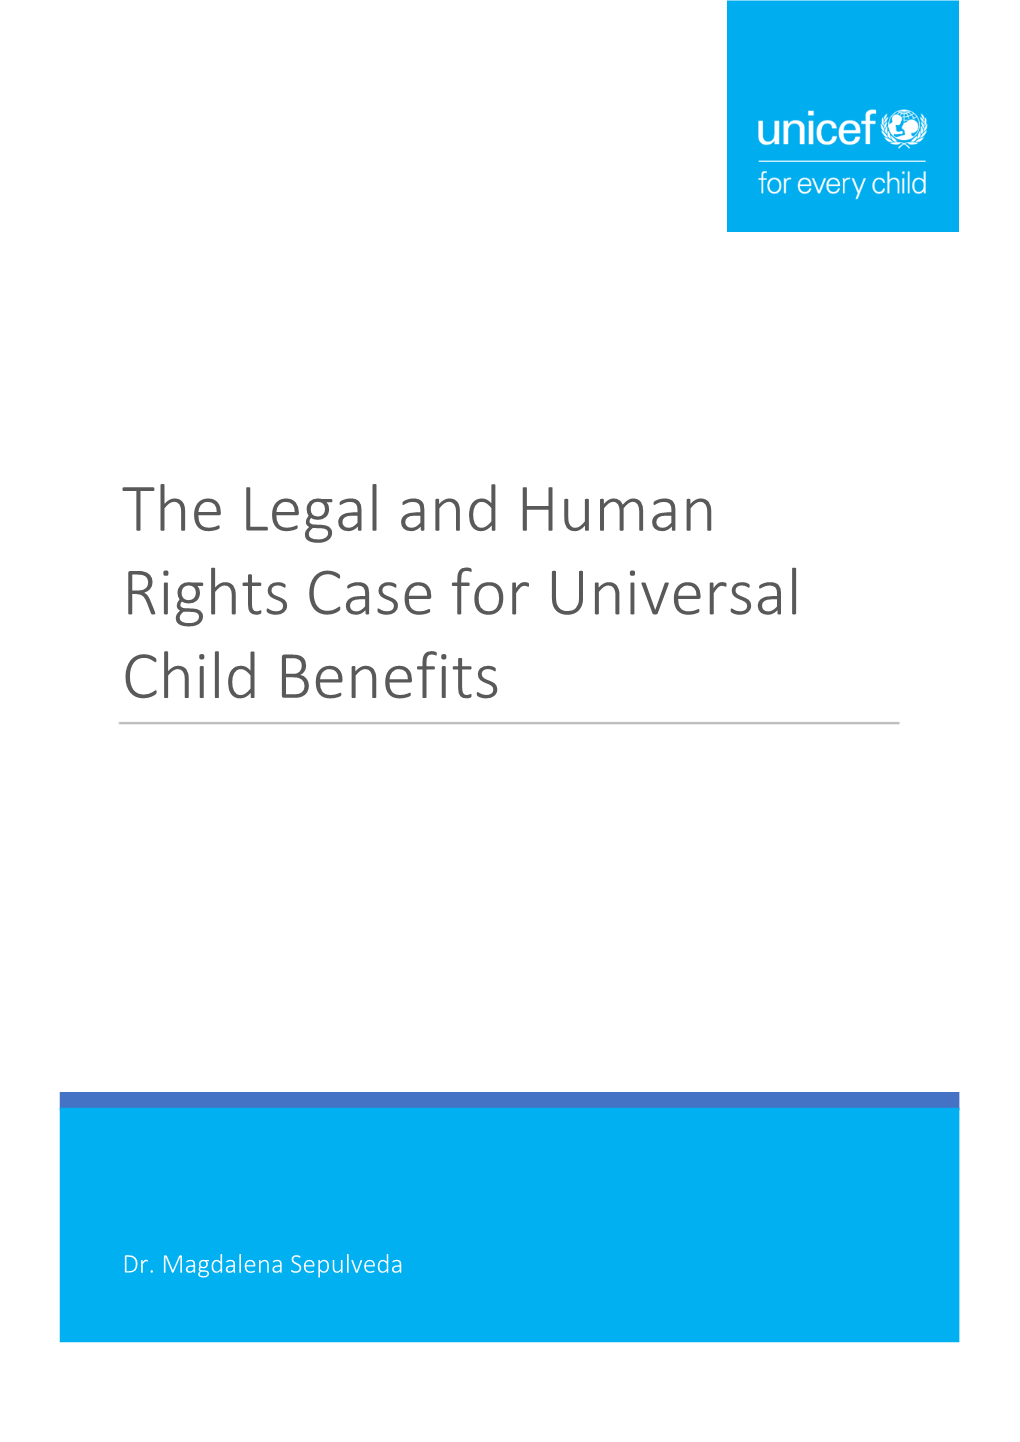 The Legal and Human Rights Case for Universal Child Benefits